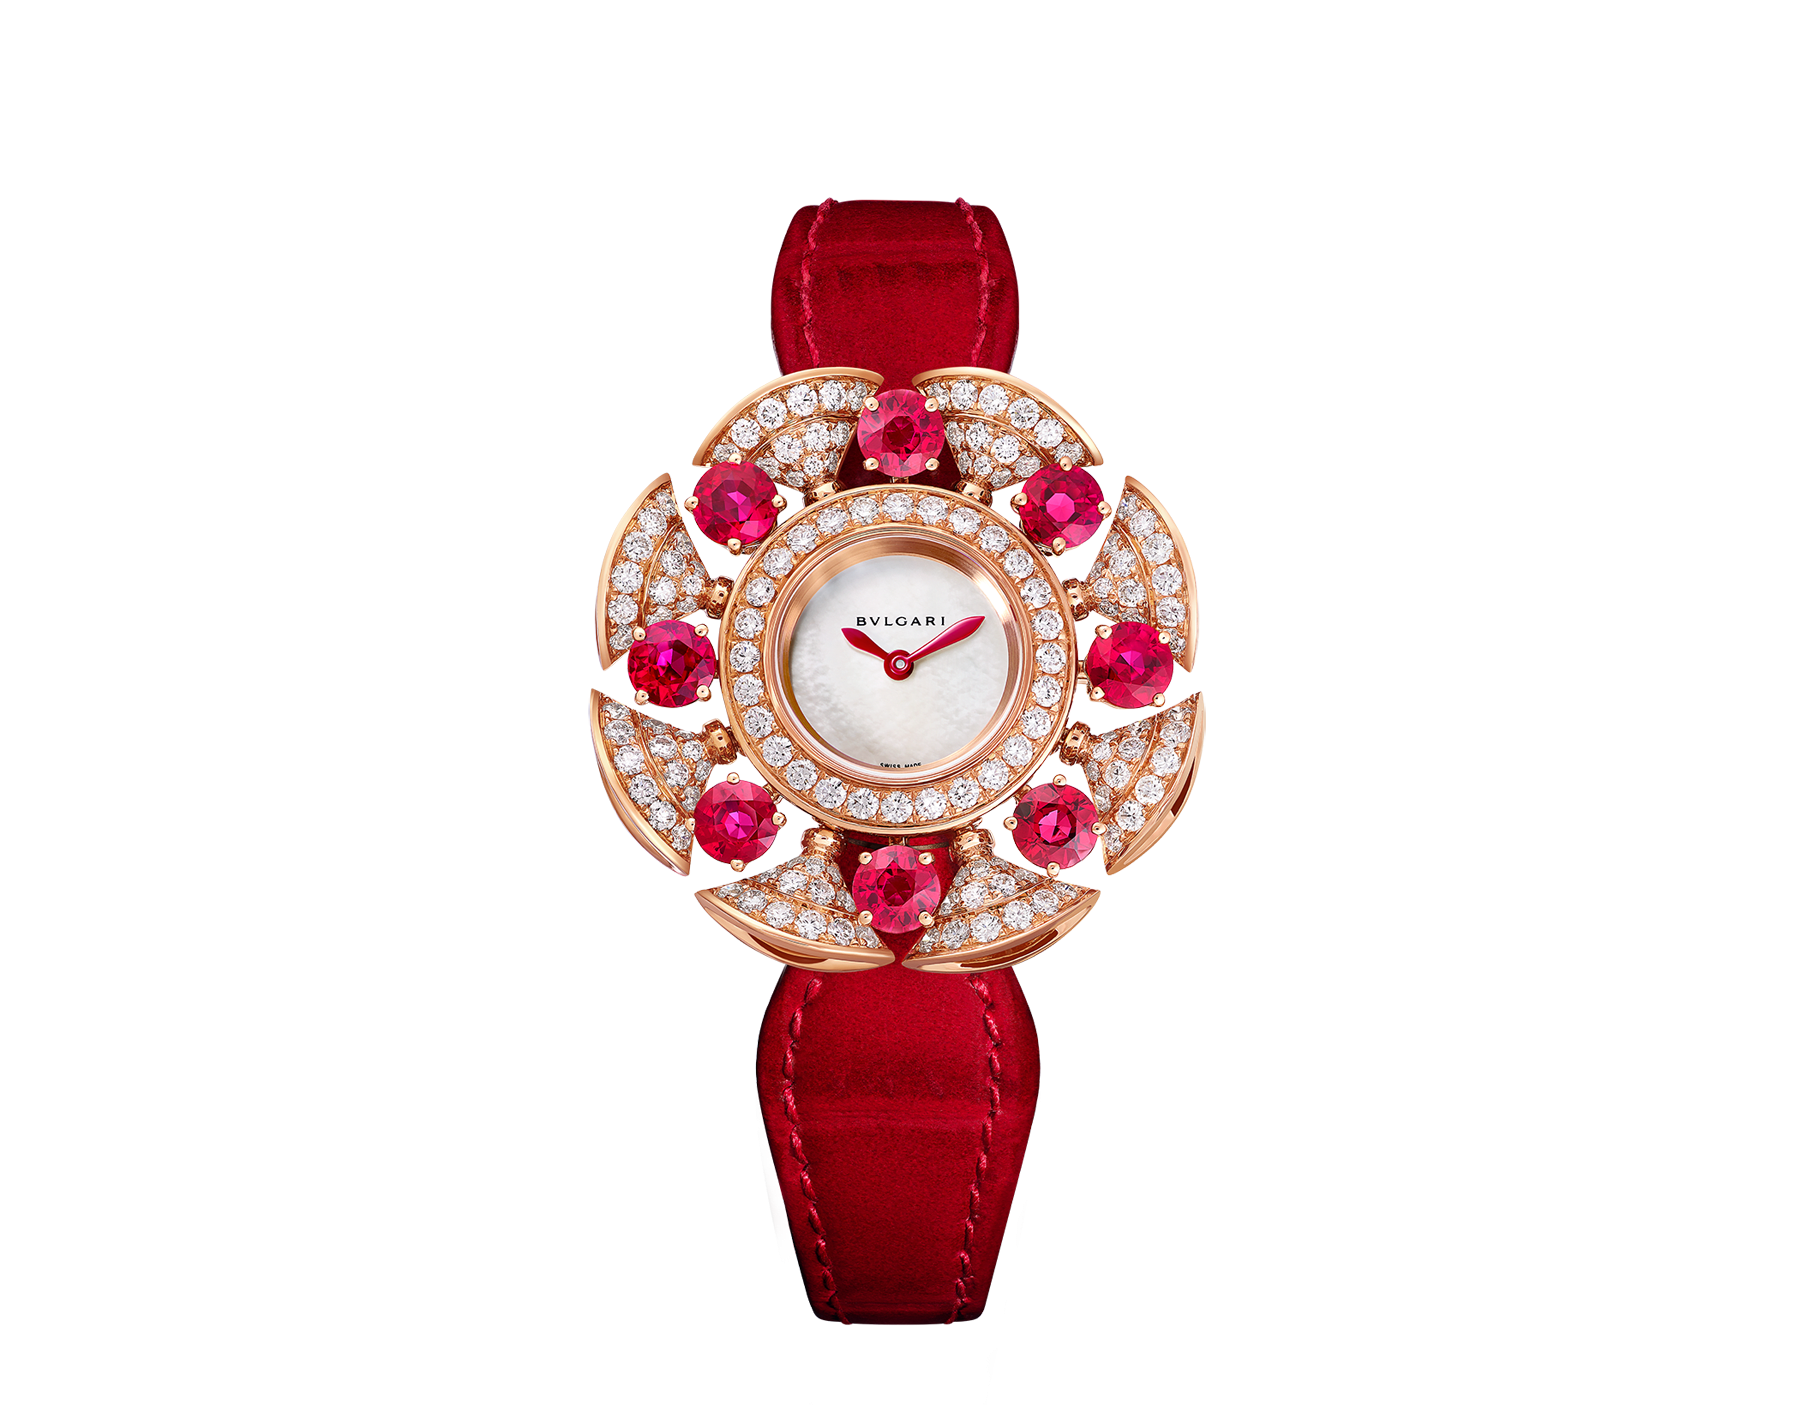 DIVAS' DREAM High Jewelry watch with 18 kt rose gold case set with round brilliant-cut diamonds (F-G VVS, ~2 ct) and 8 brilliant-cut rubies (~3.6 ct), mother-of-pearl dial and red alligator bracelet. Water-resistant up to 30 meters. 103754 image 1